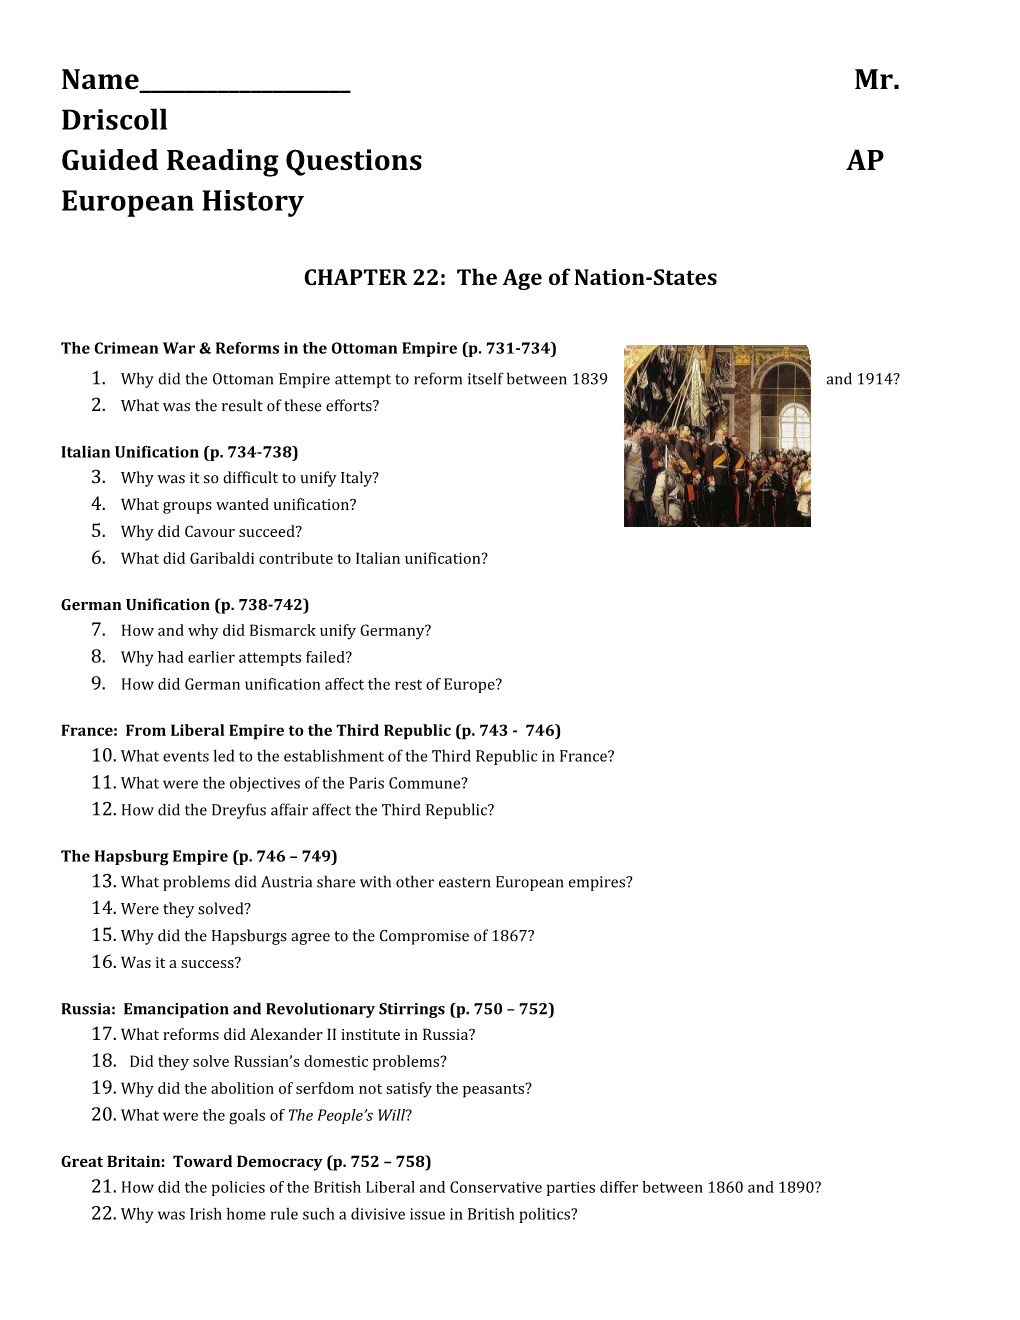 Guided Reading Questions AP European History